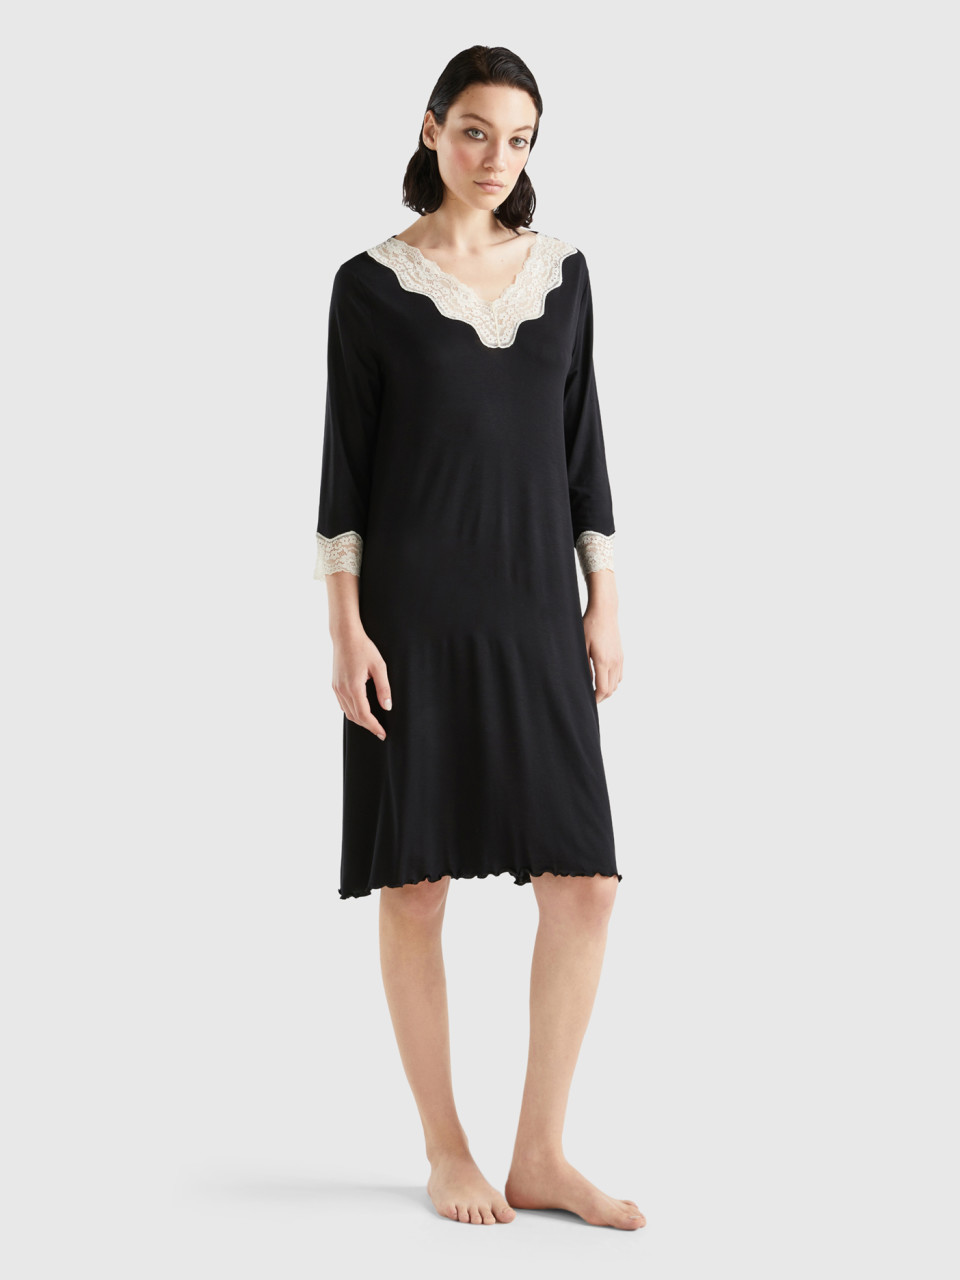 Benetton, Nightshirt With Lace Details, Black, Women